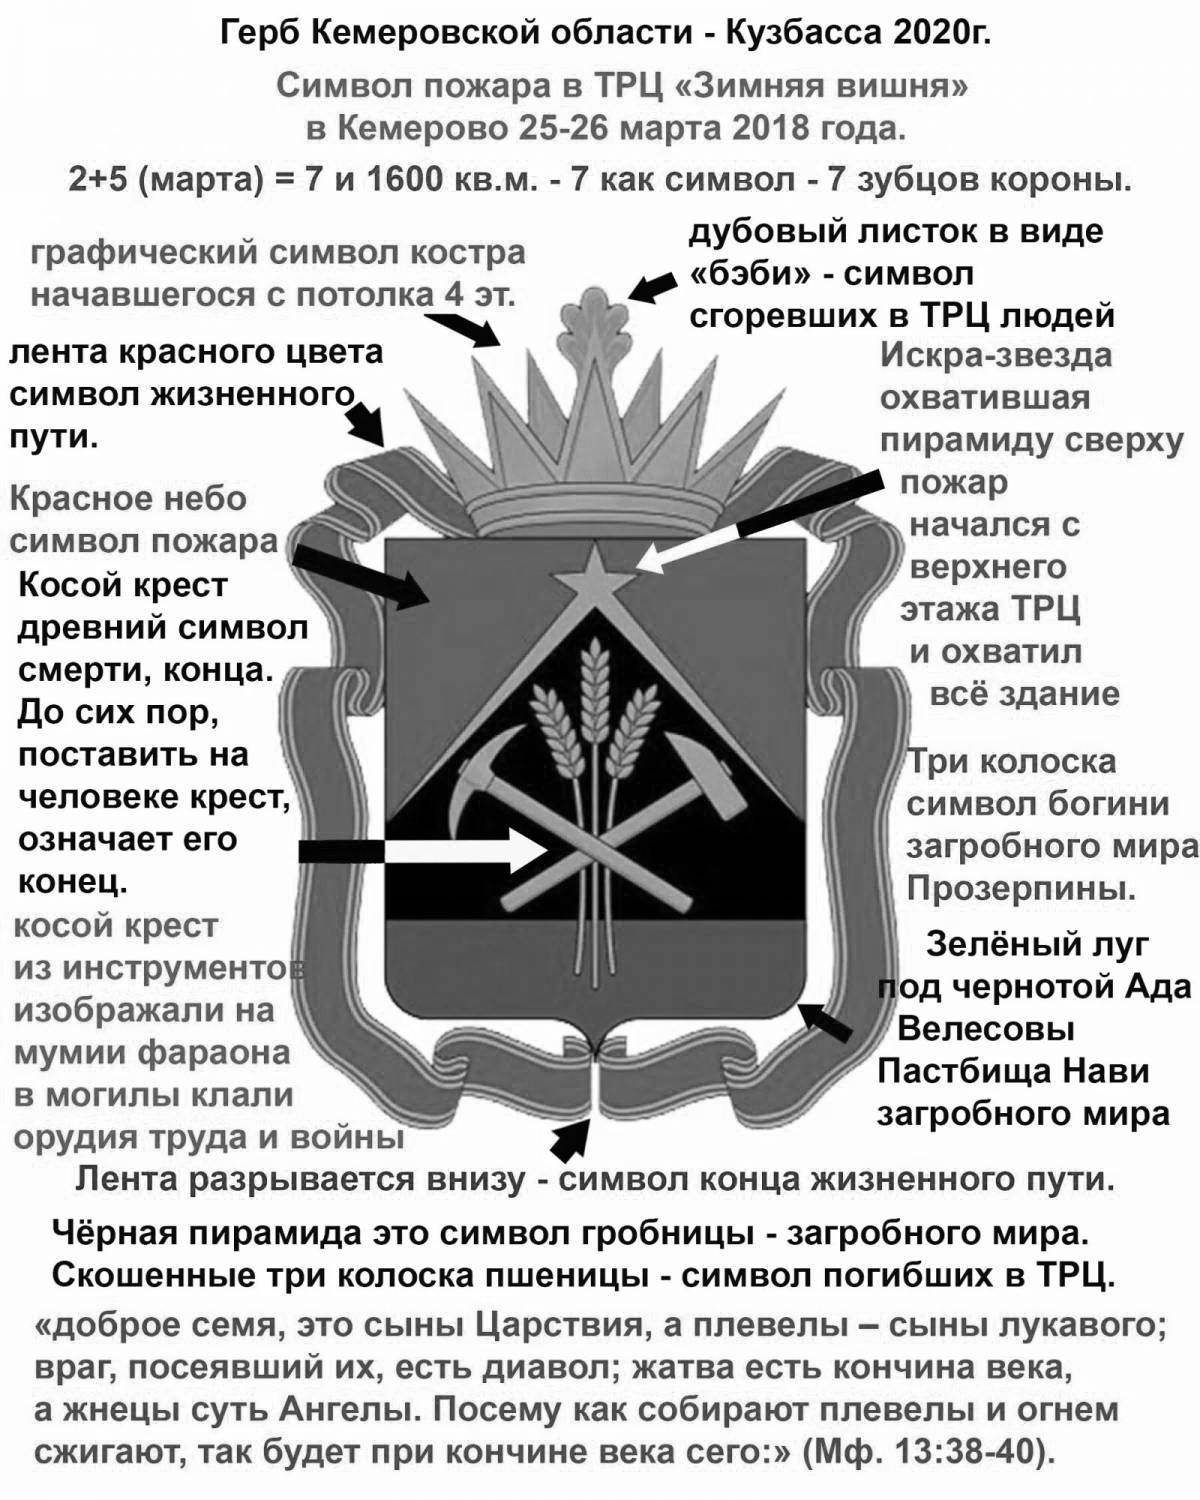 Impressive coloring coat of arms of Kuzbass